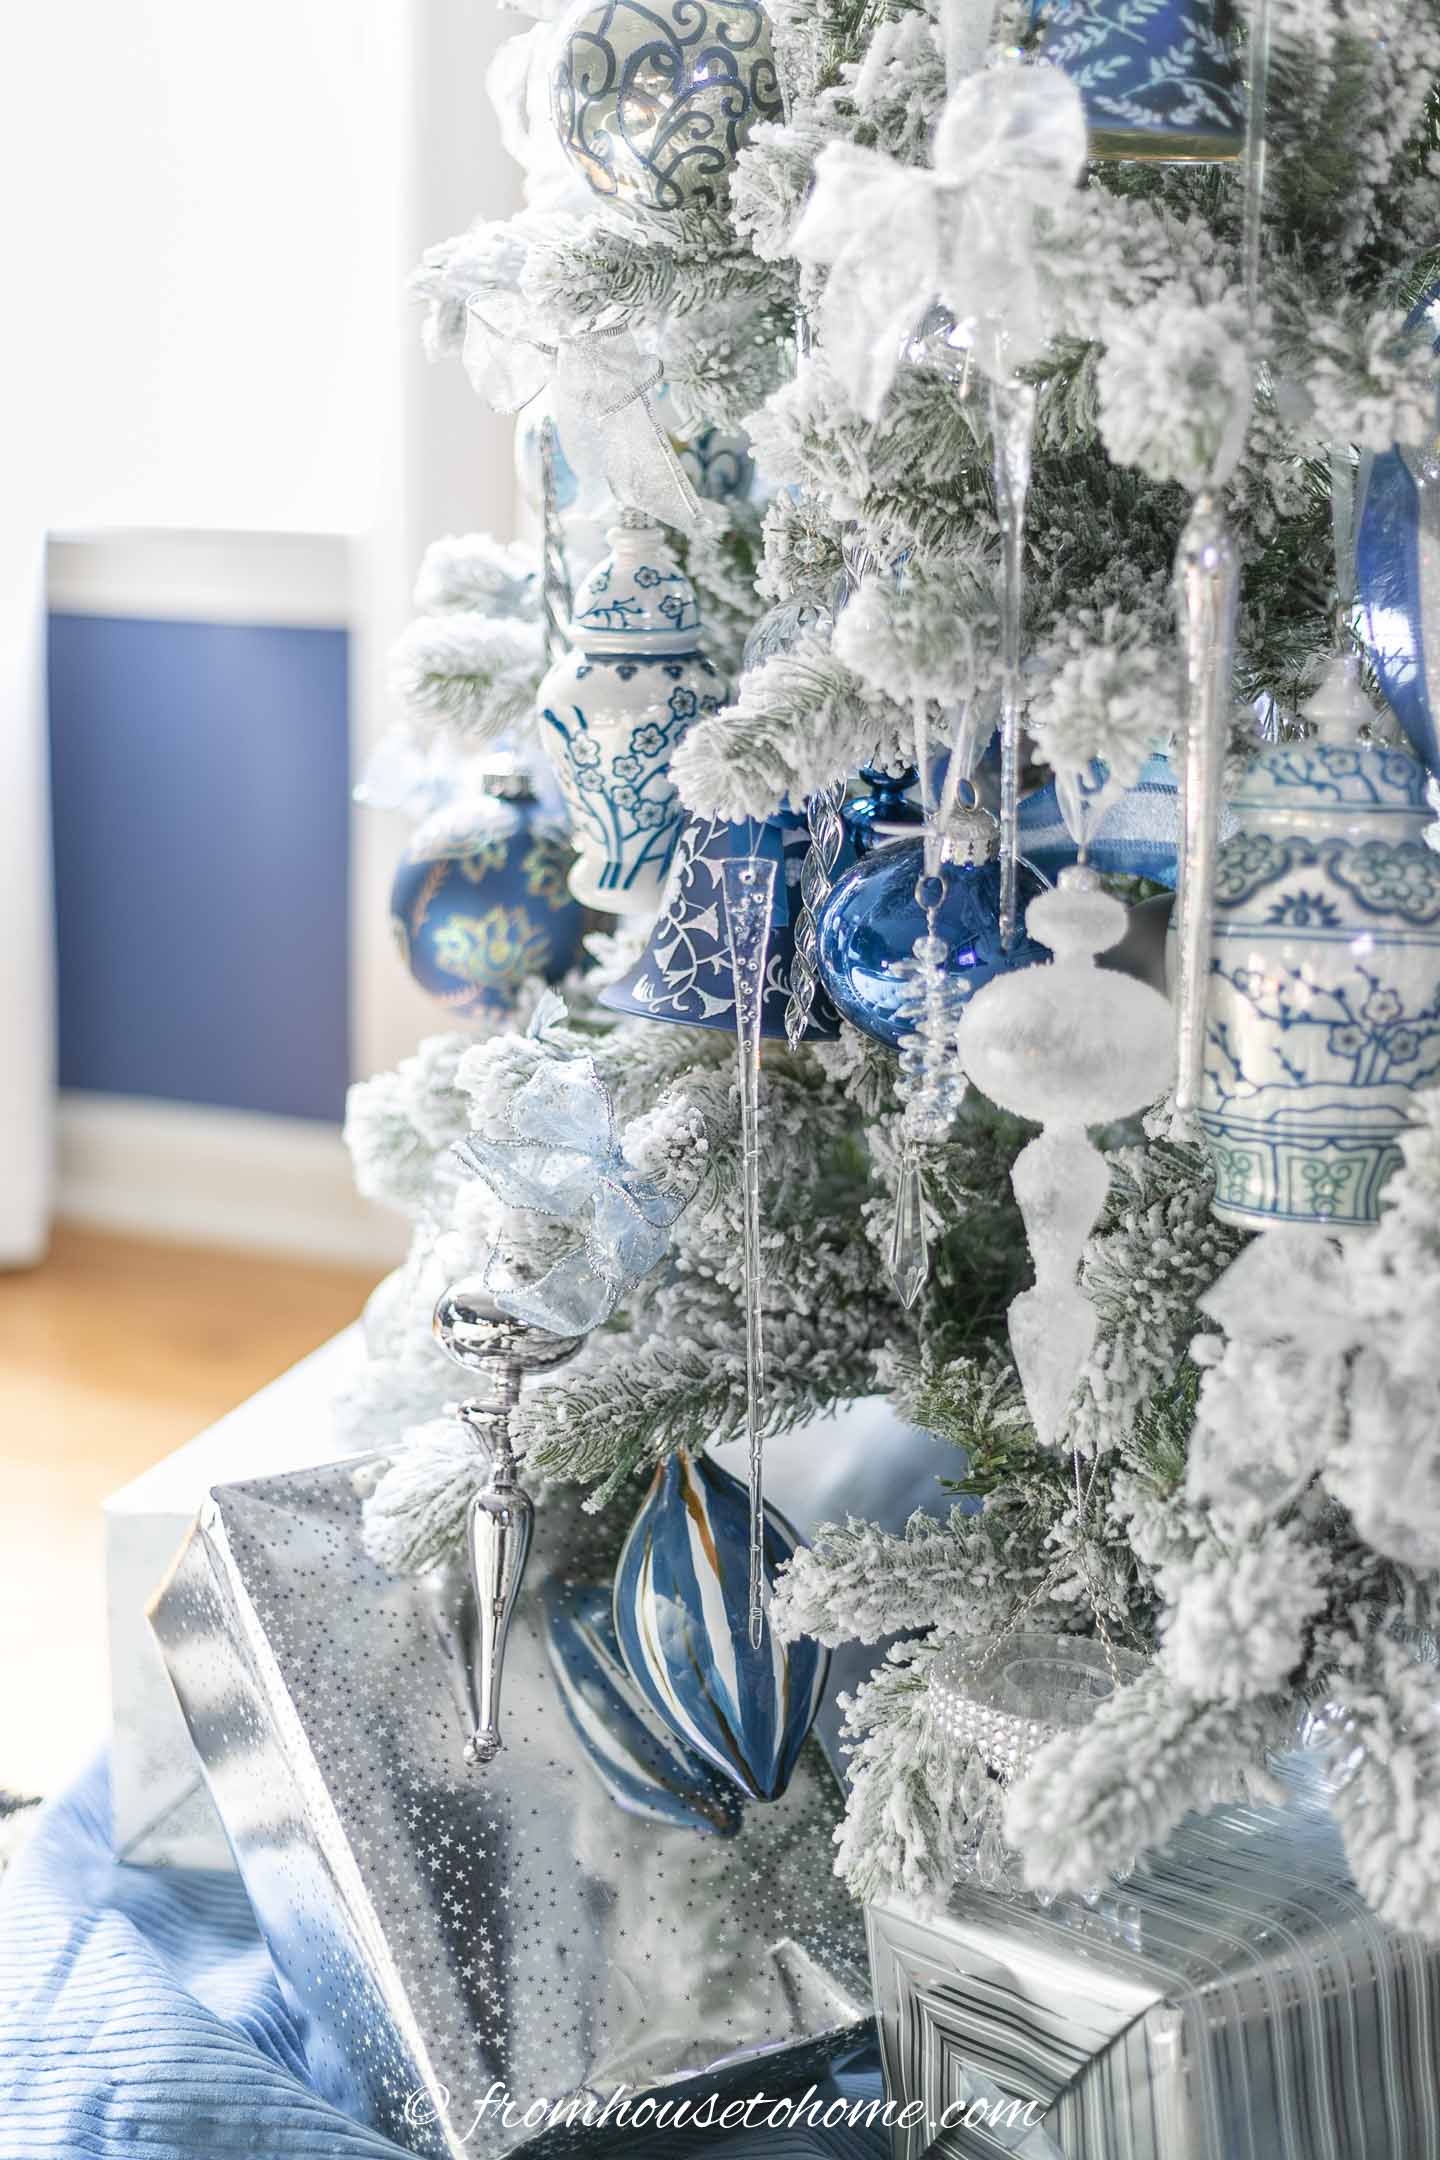 Christmas presents wrapped in silver wrapping paper under a wintry white, blue and silver christmas tree